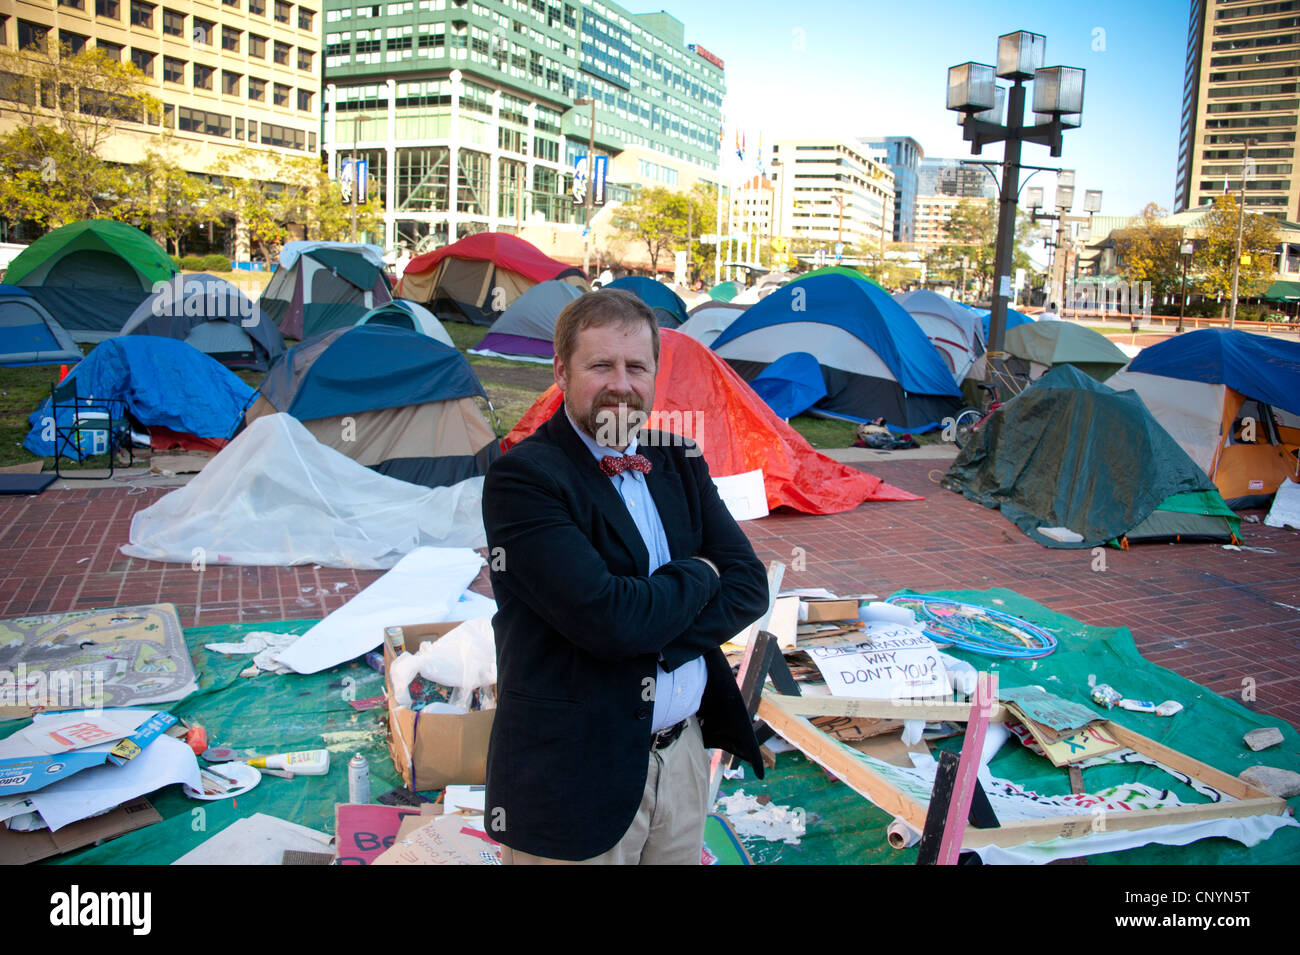 Man stands in jest against occupy movement tents in Baltimore, MD Stock Photo